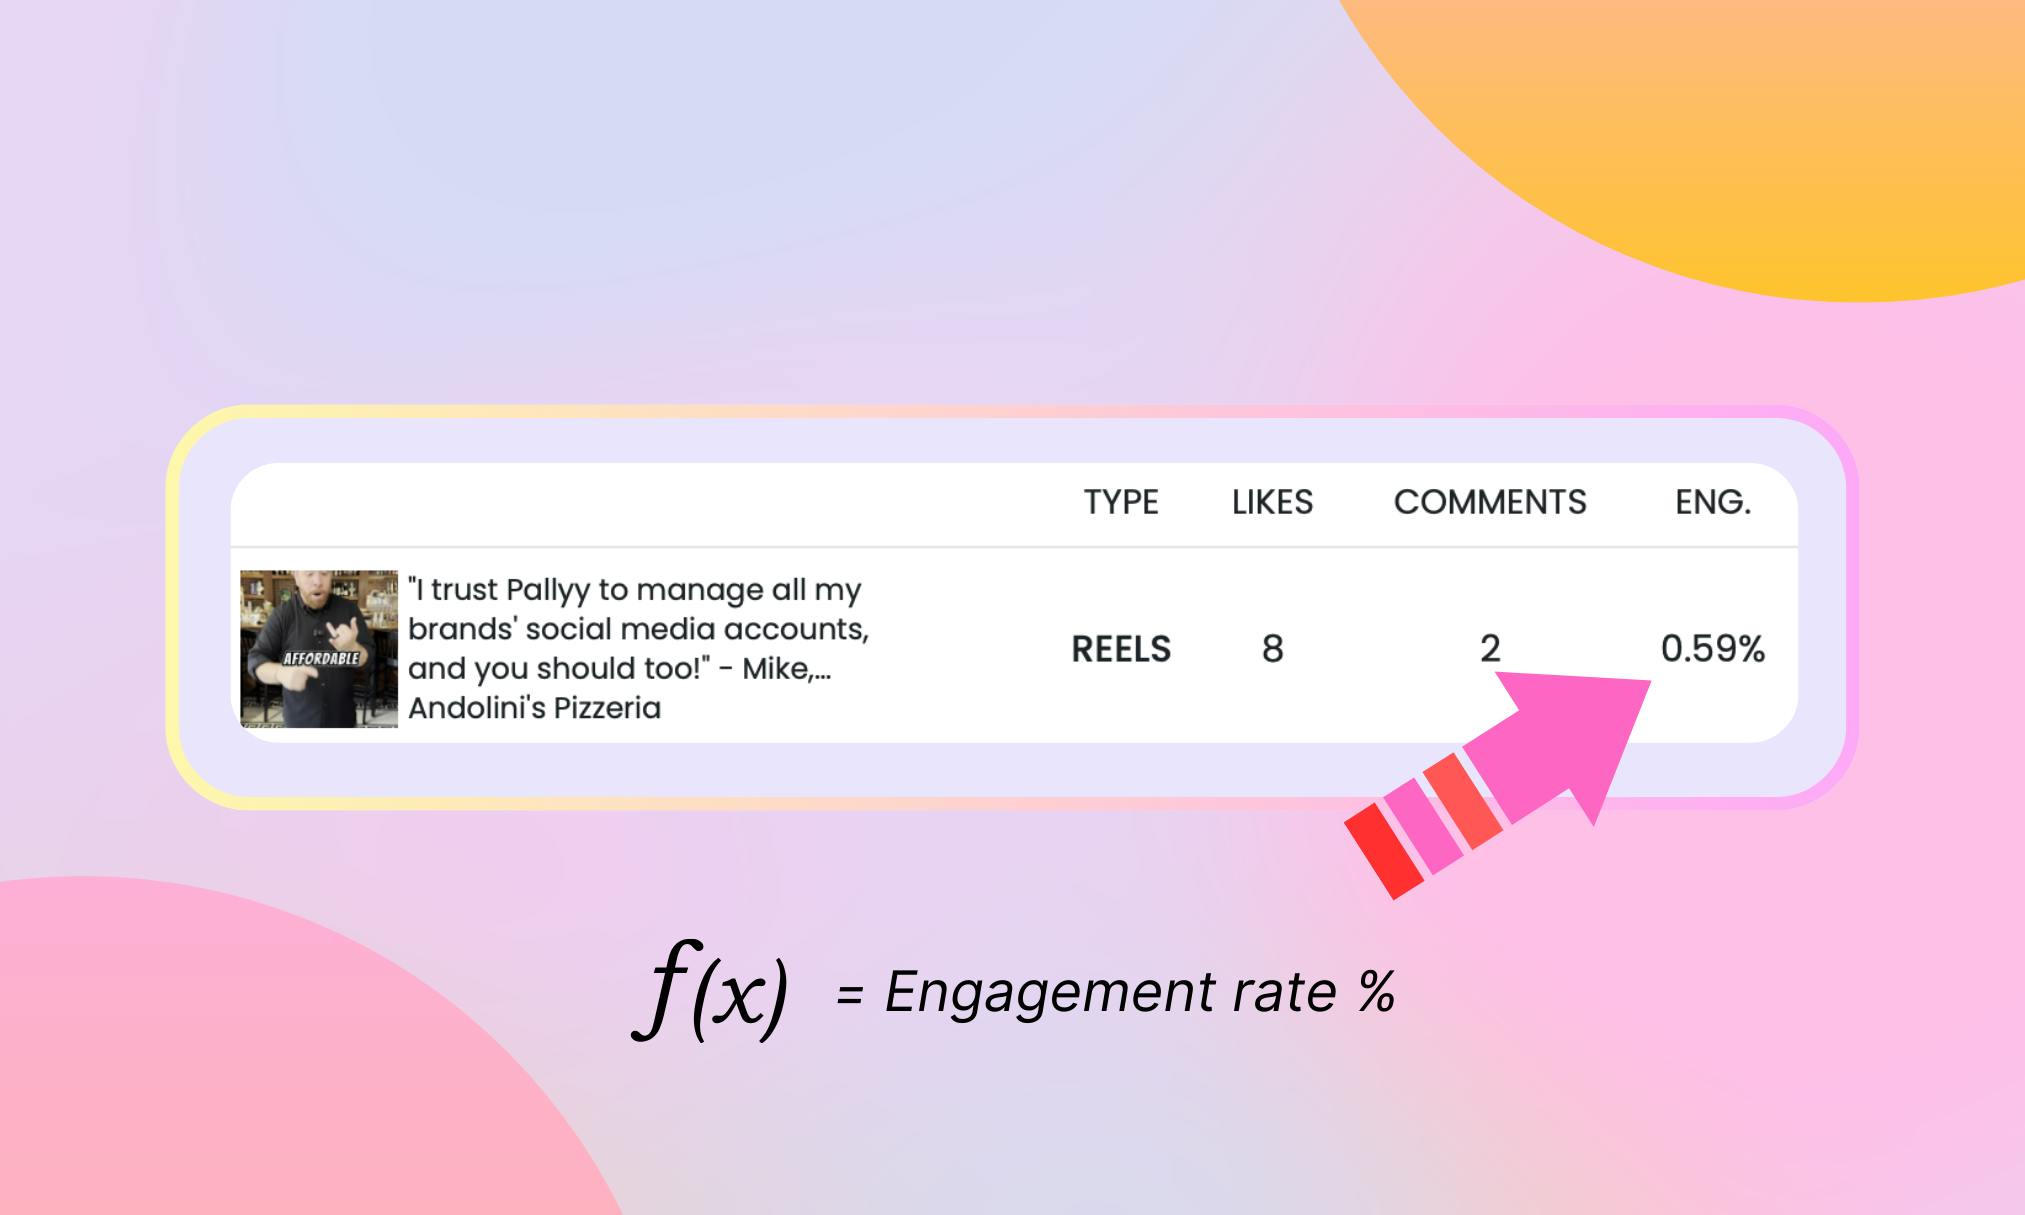 How to calculate engagement rate